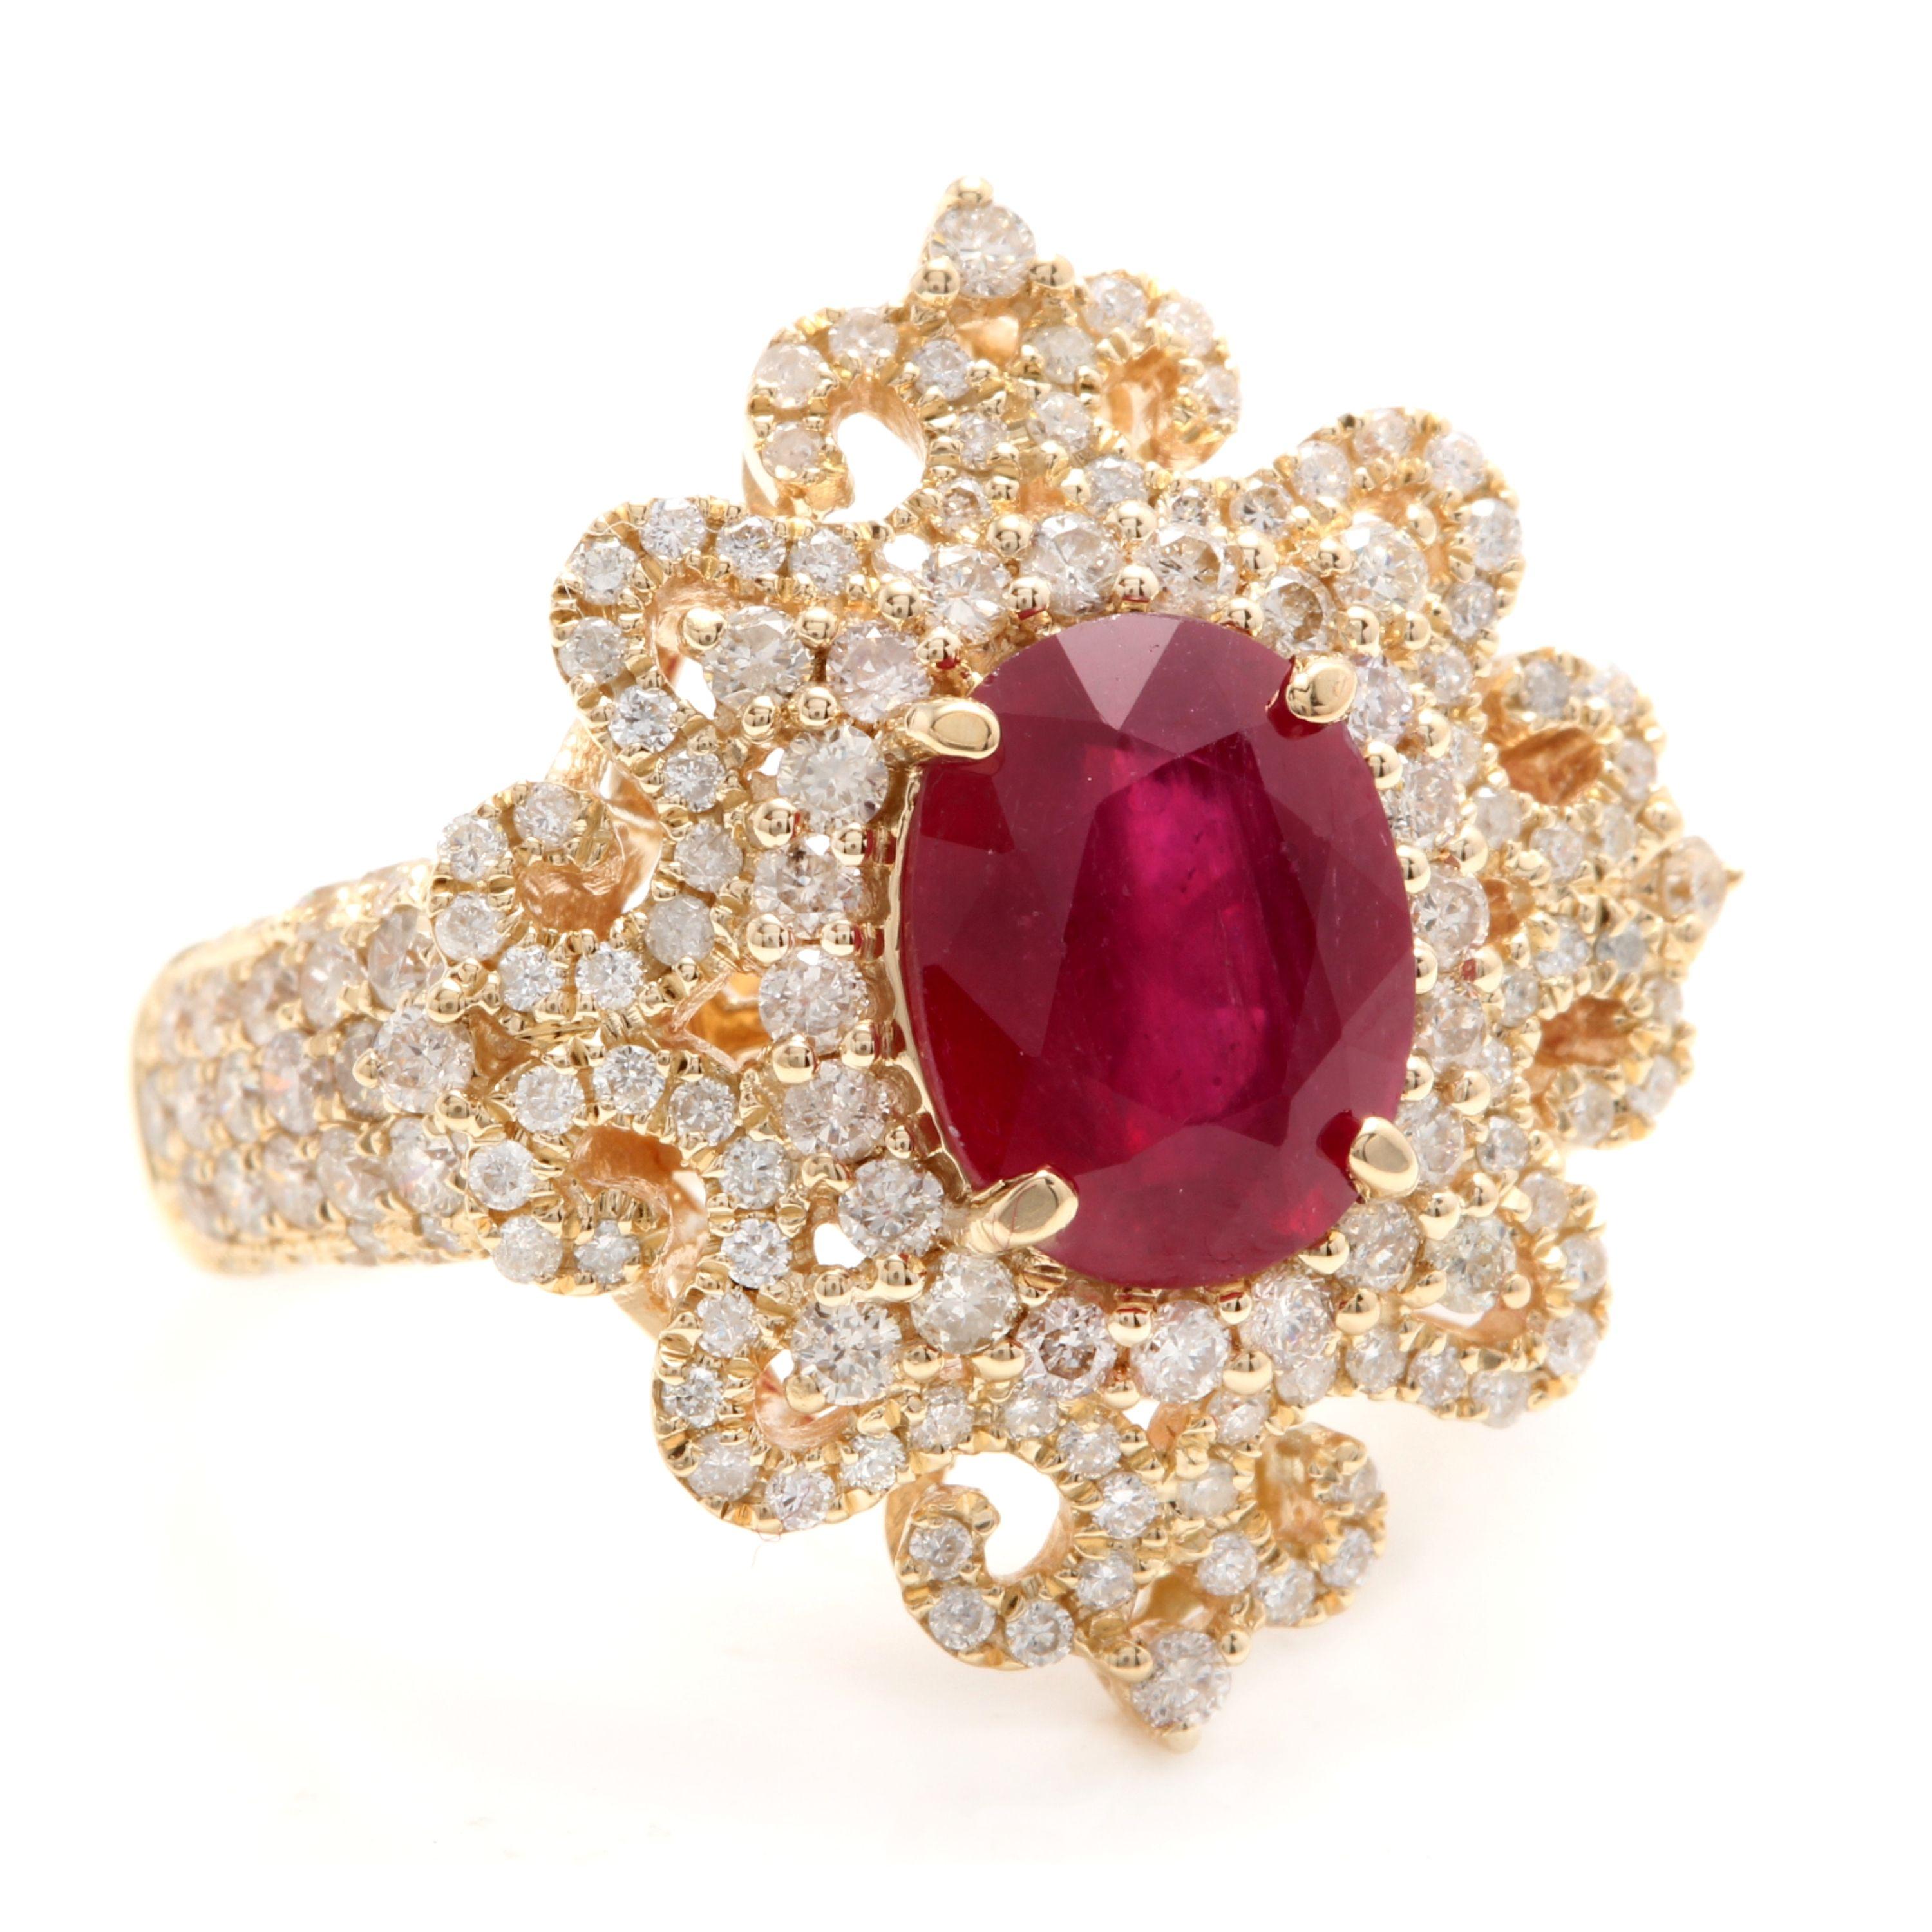 Mixed Cut 4.50 Carat Impressive Red Ruby and Natural Diamond 14K Solid Yellow Gold Ring For Sale